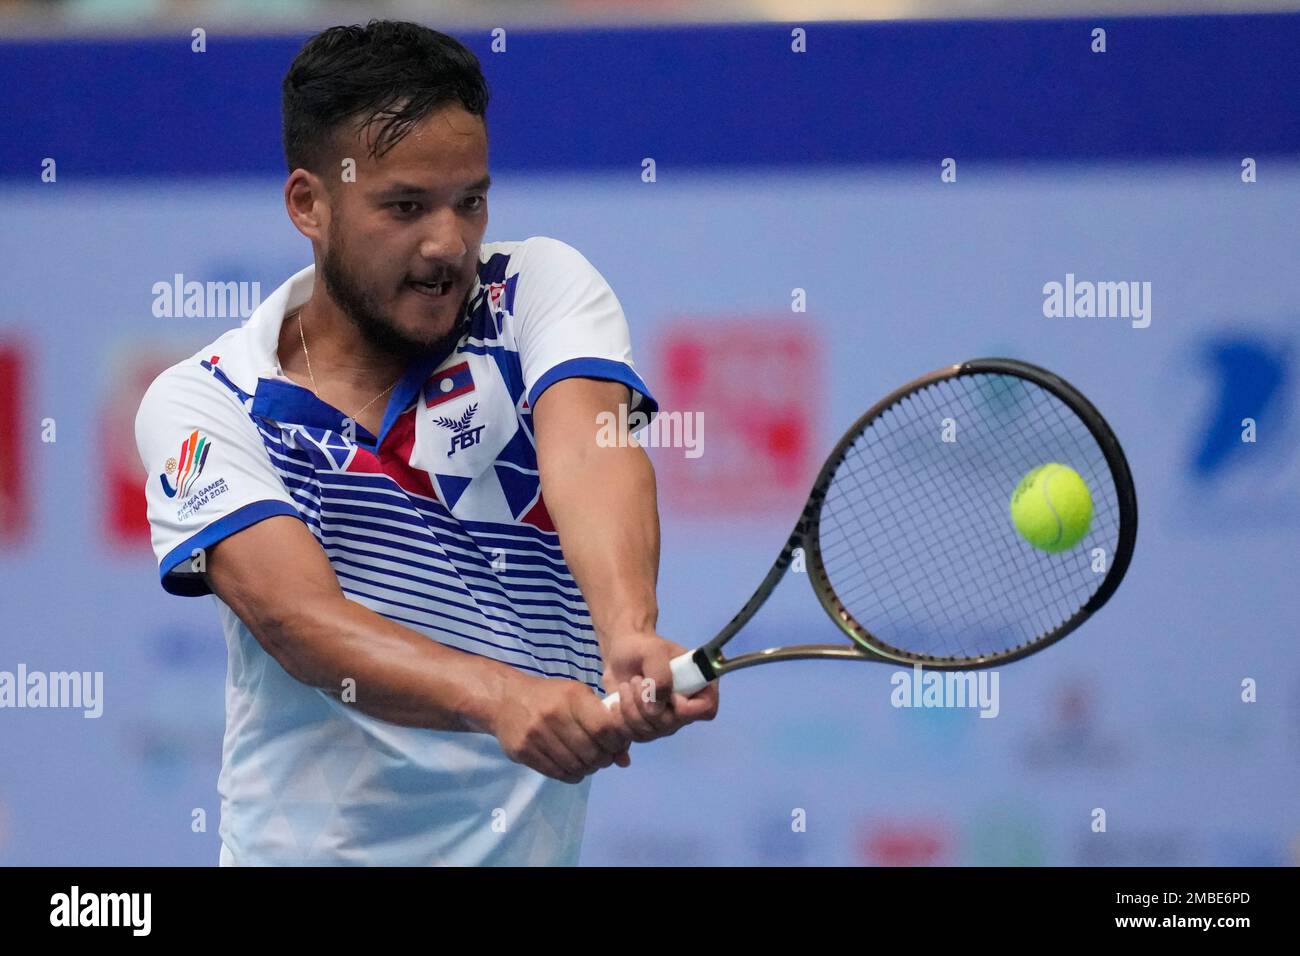 Mick Lescure Sadettan of Laos returns a ball to Giang Trinh Linh of Vietnam  during their men's singles semi-final tennis match at the 31st Southeast  Asian Games (SEA Games 31) in Bac